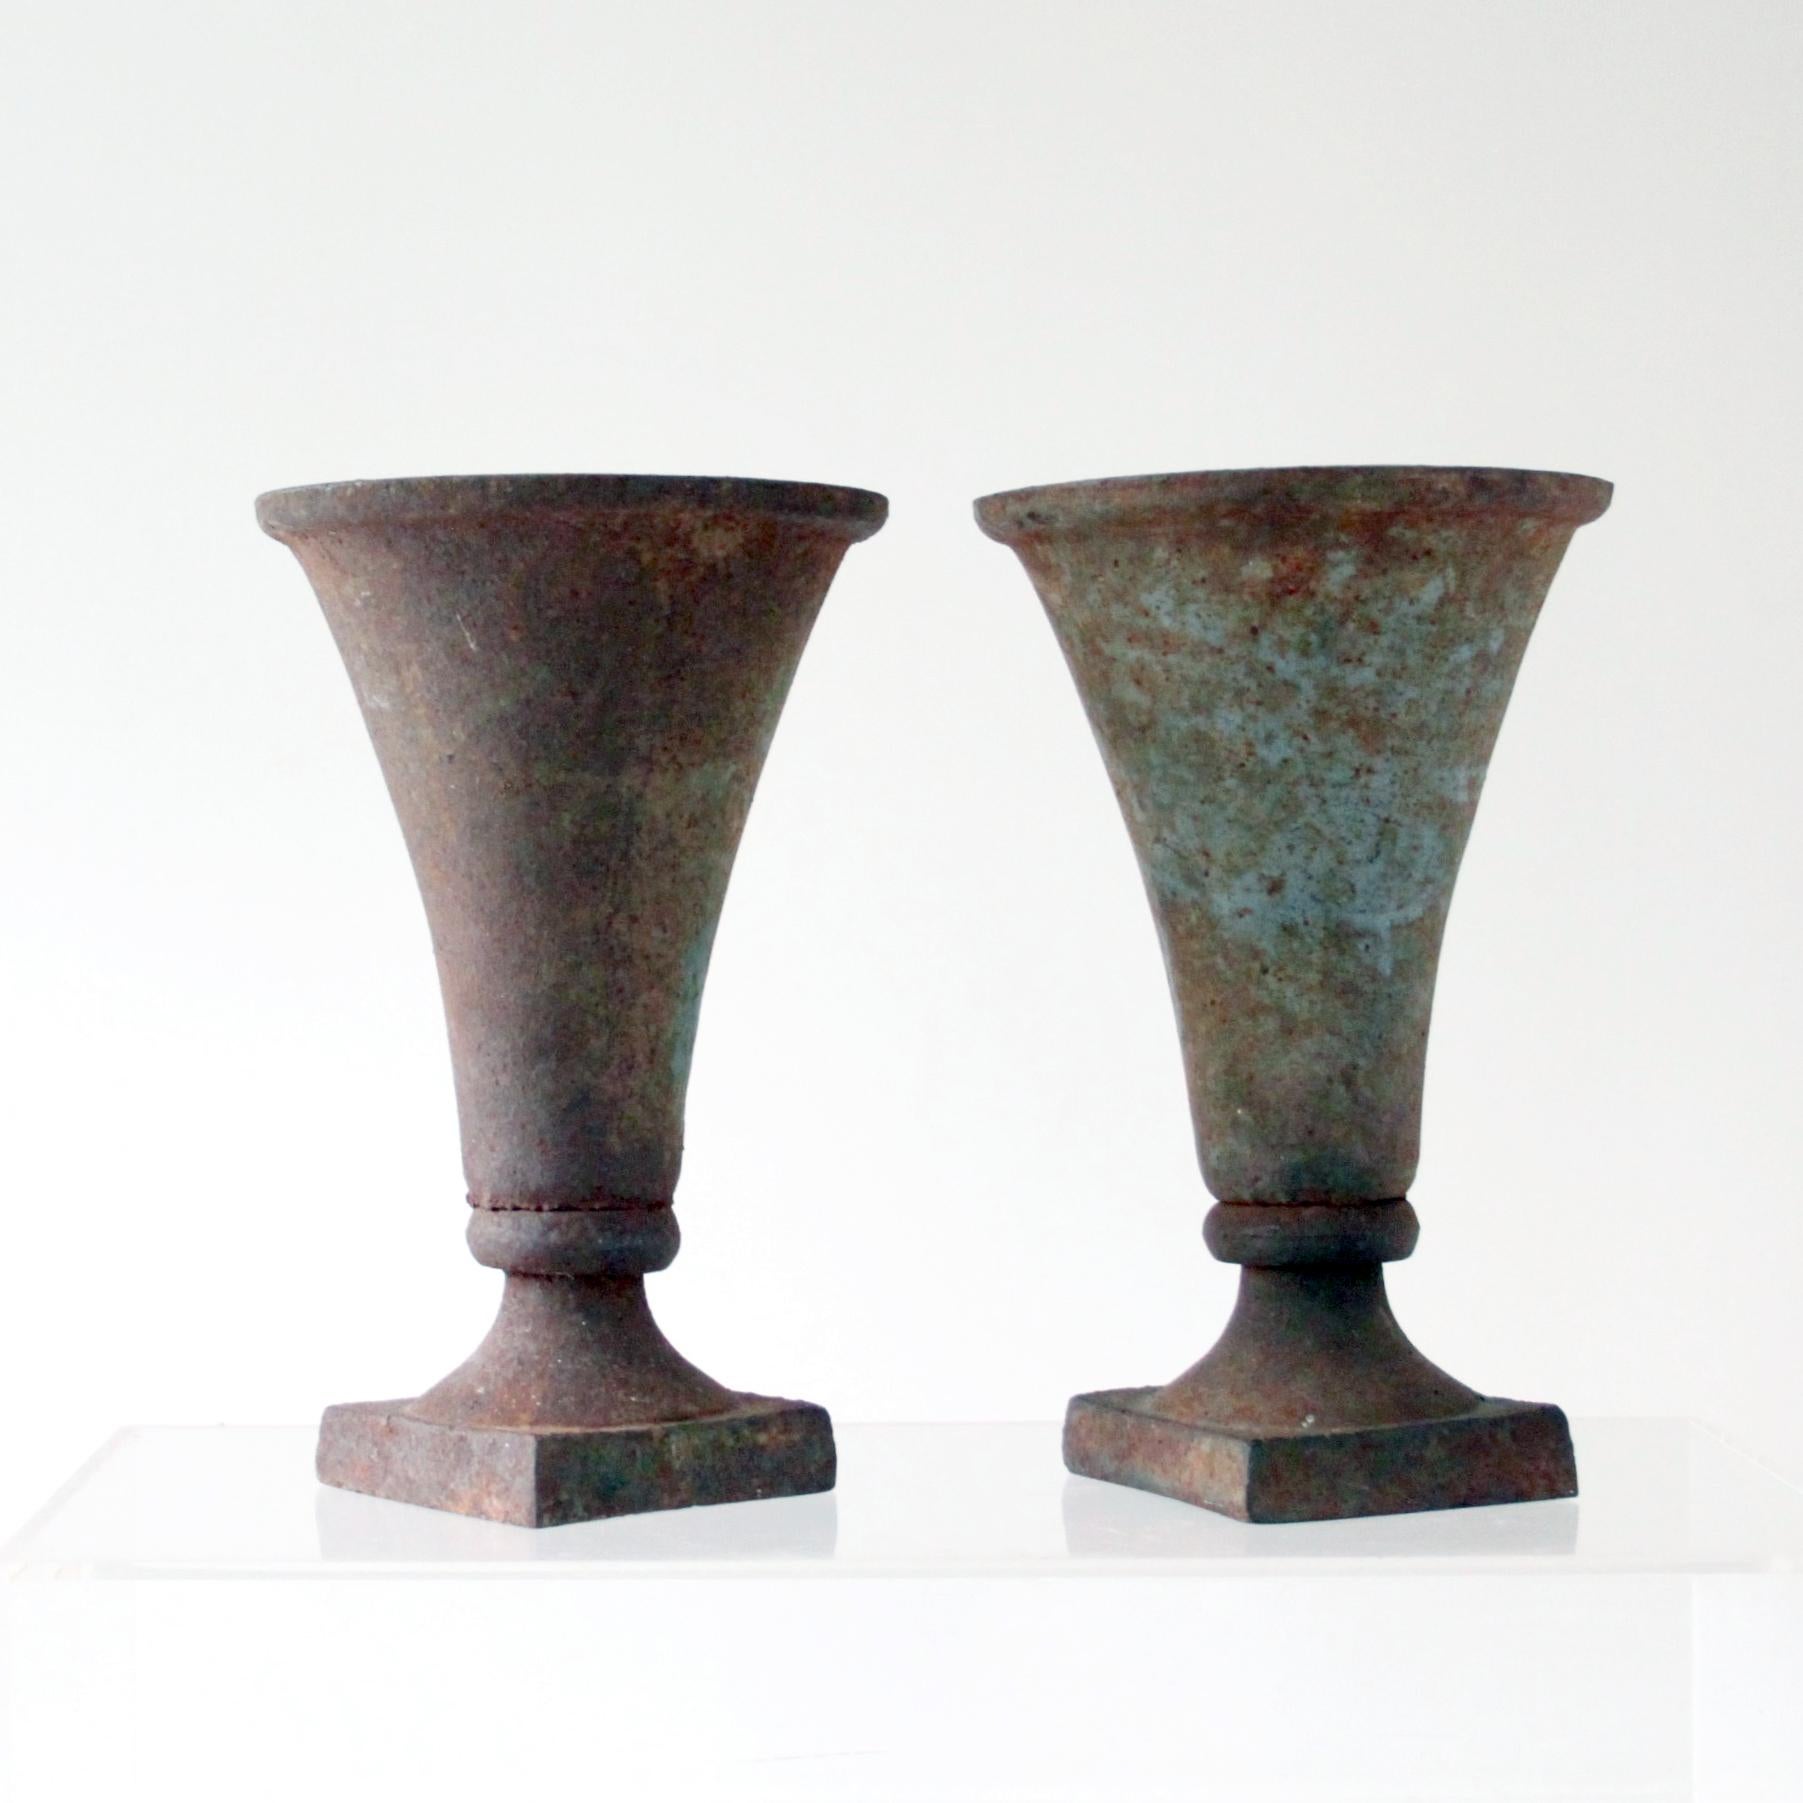 A set of two beautiful antique vases in cast iron with patina. 

The vases have been acquired by former owner in Paris and have been used as center pieces in a Copenhagen flower shop.

They be used both as vases and as a jardinière.

Excellent